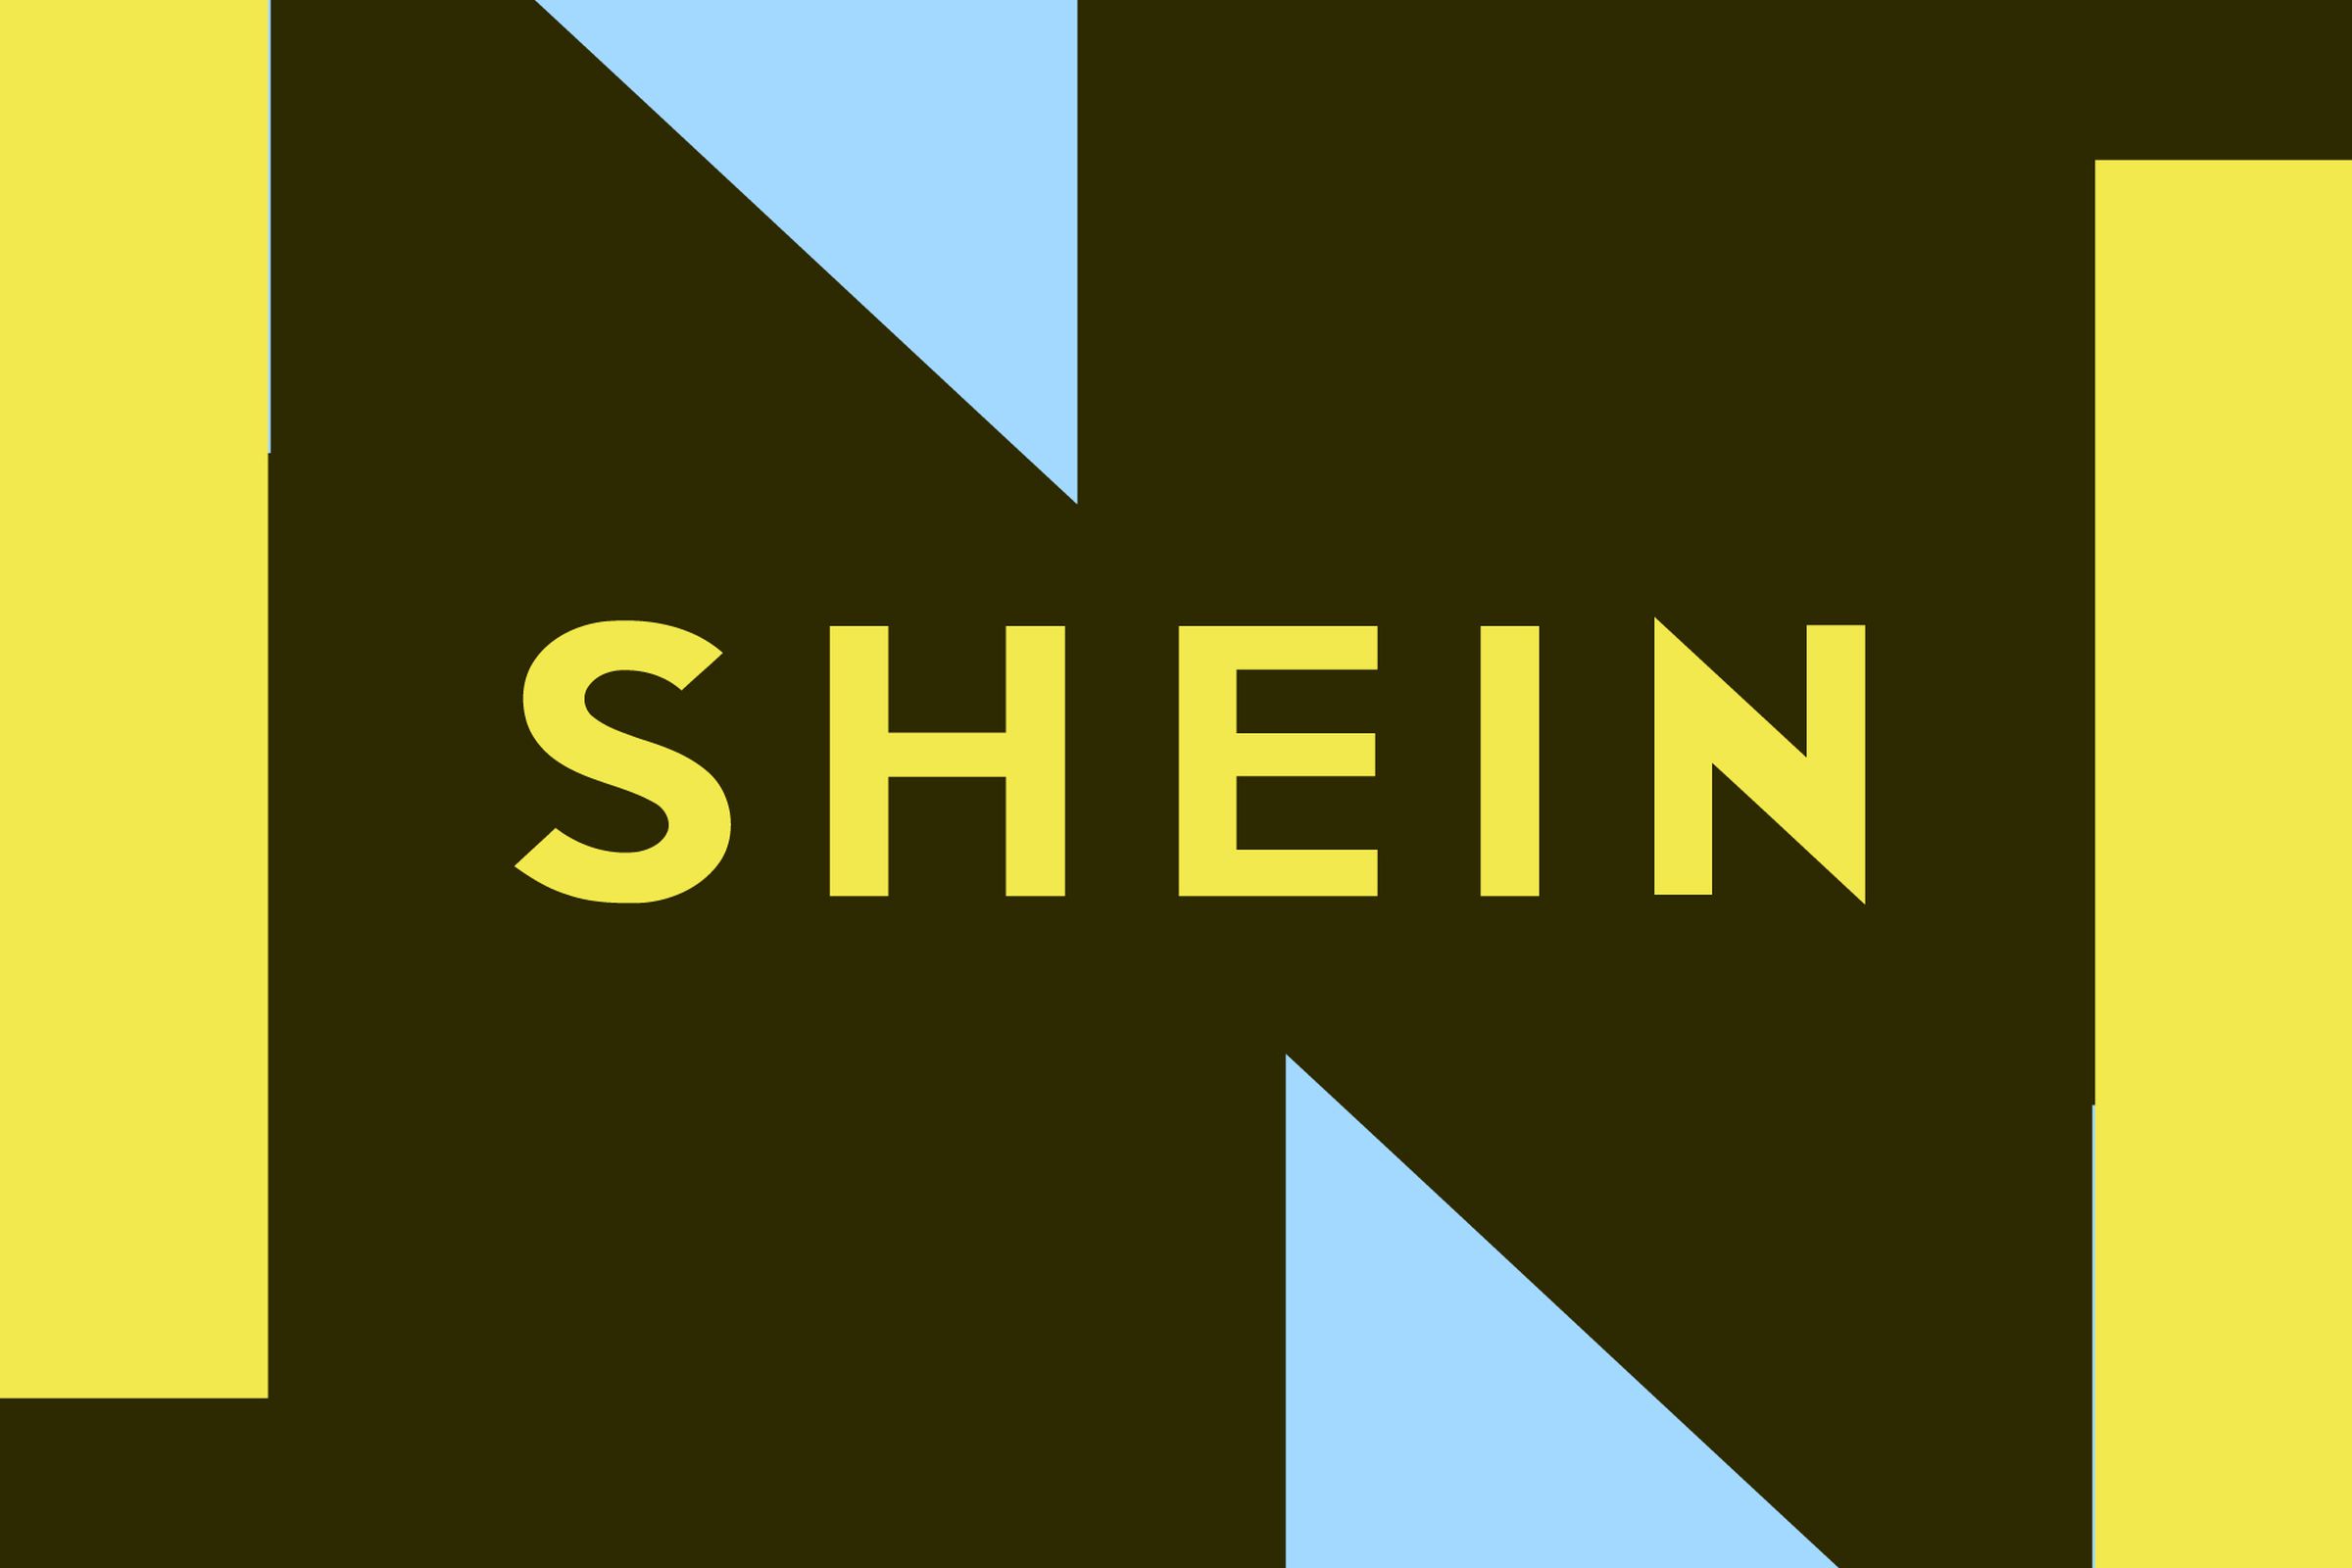 Shein logo over blue, yellow, and brown geometric background.